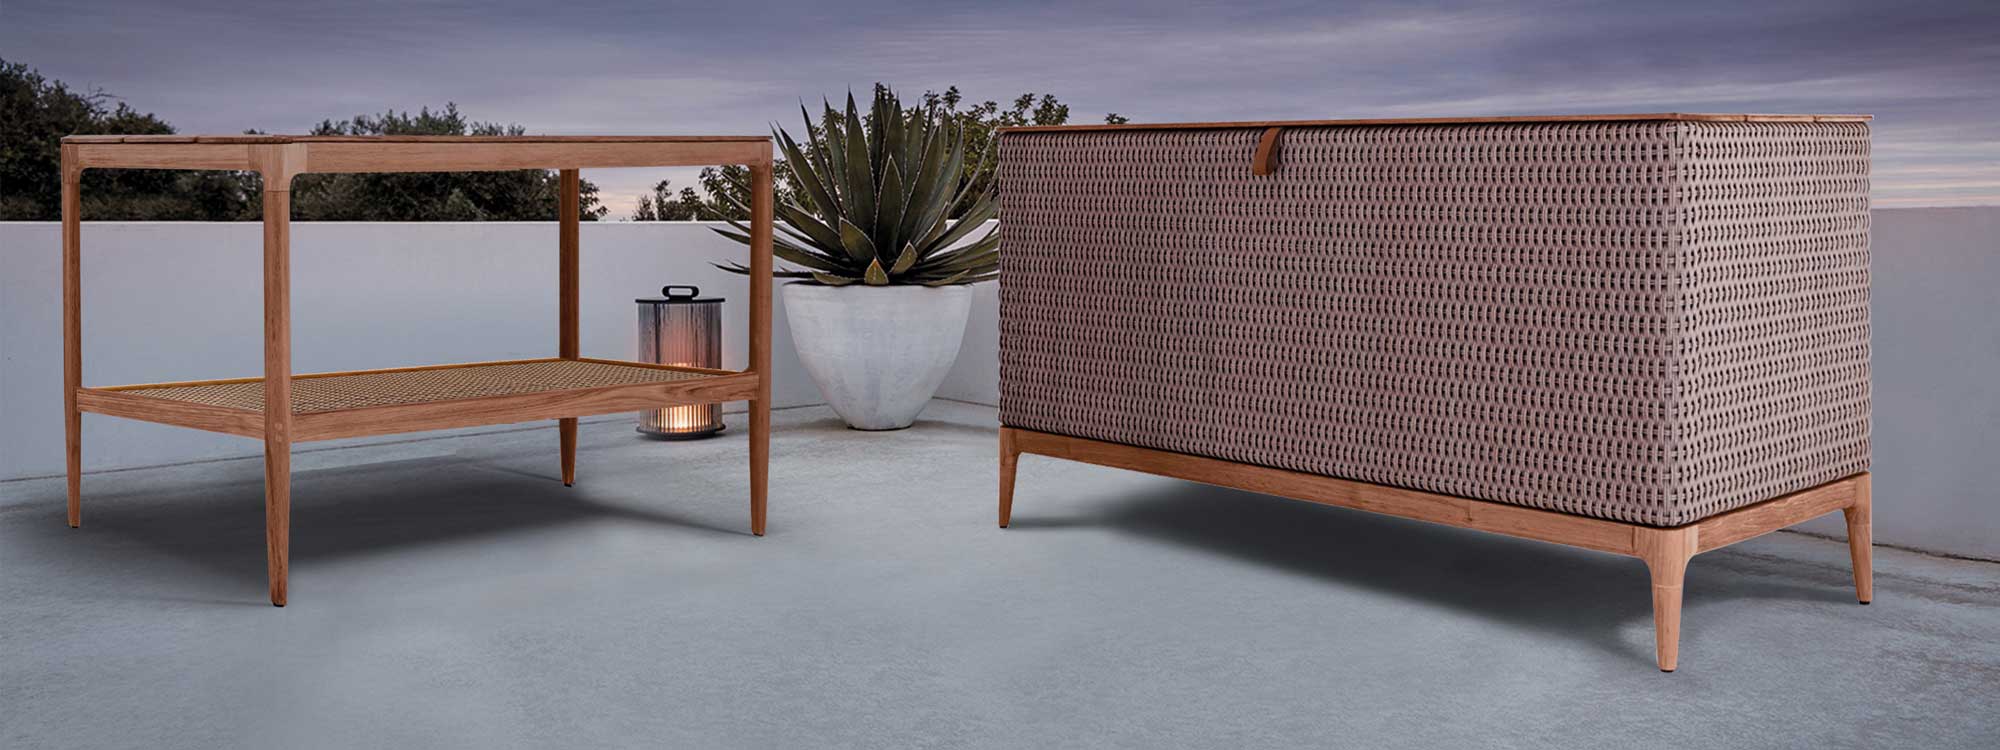 Image of Gloster Lima outdoor cushion box next to Lima sideboard